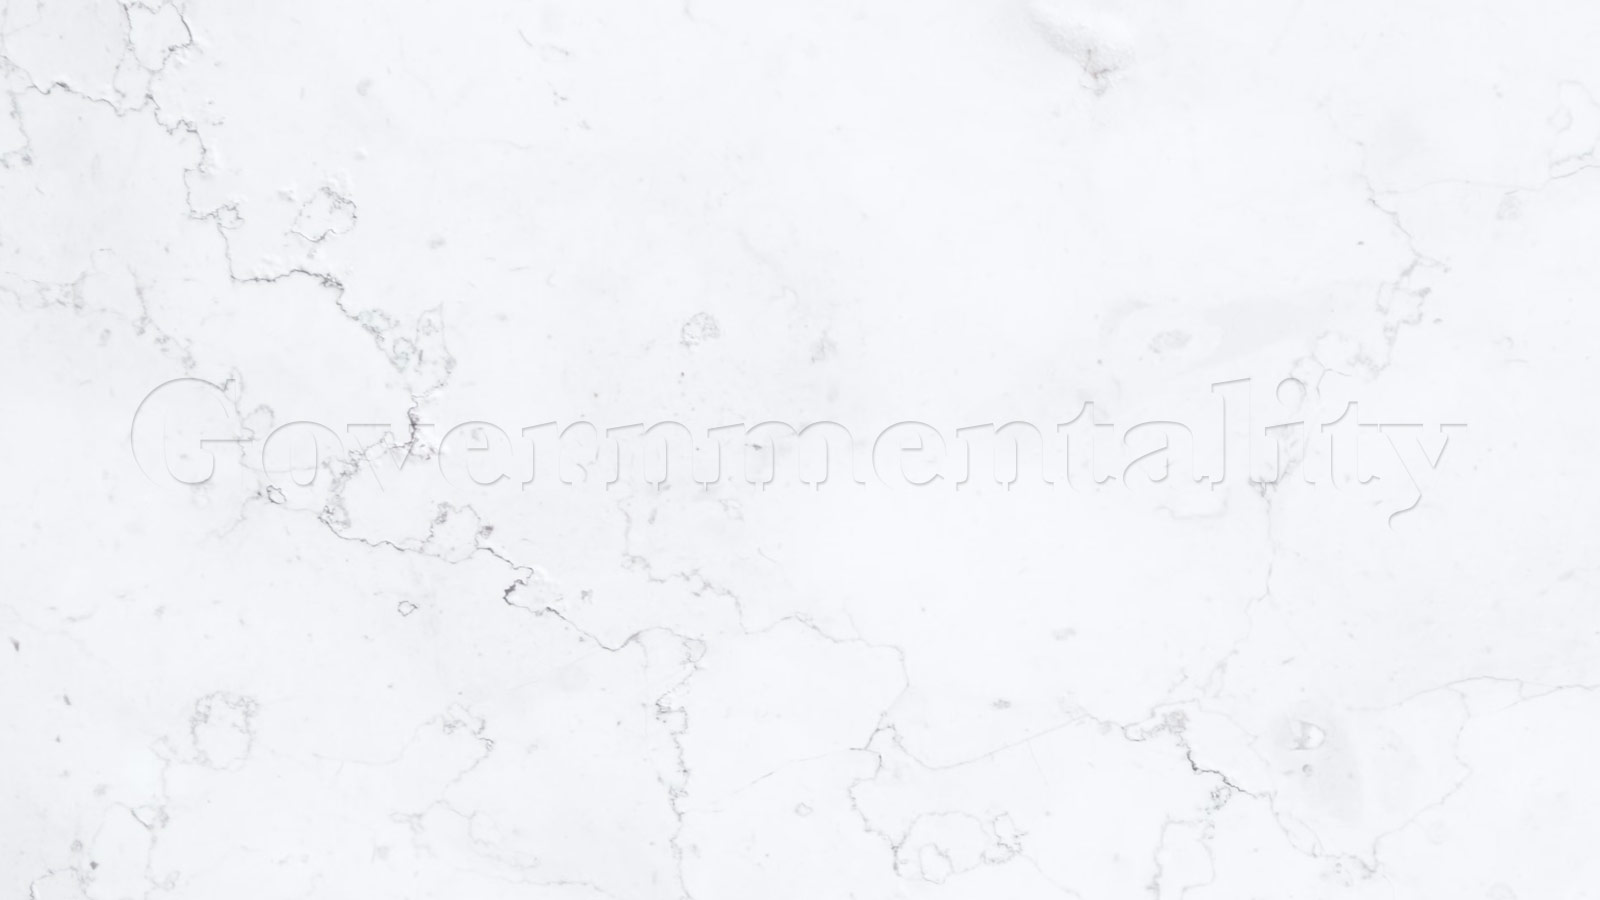 white marble texture background with a subtle hint of the word governmentality coming through like it was chiseled into the stone